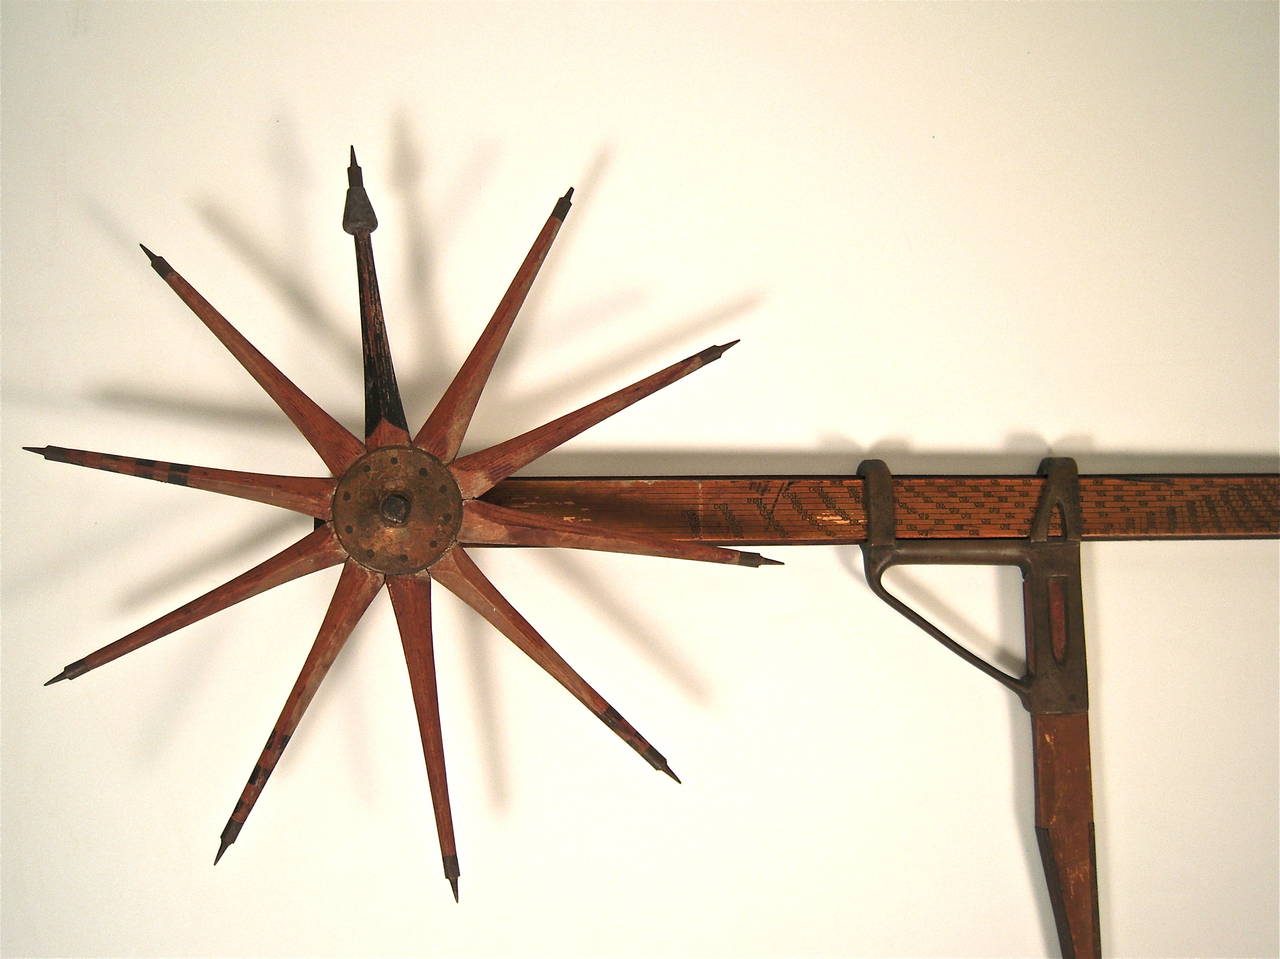 A beautifully made log caliper and rule, with weighted walking wheel and incised  intricately detailed numbered ruler, with  sliding metal gage, made by Florence M. Greenleaf, Littleton, New Hampshire (signed), circa 1916-1922, the wheel possibly